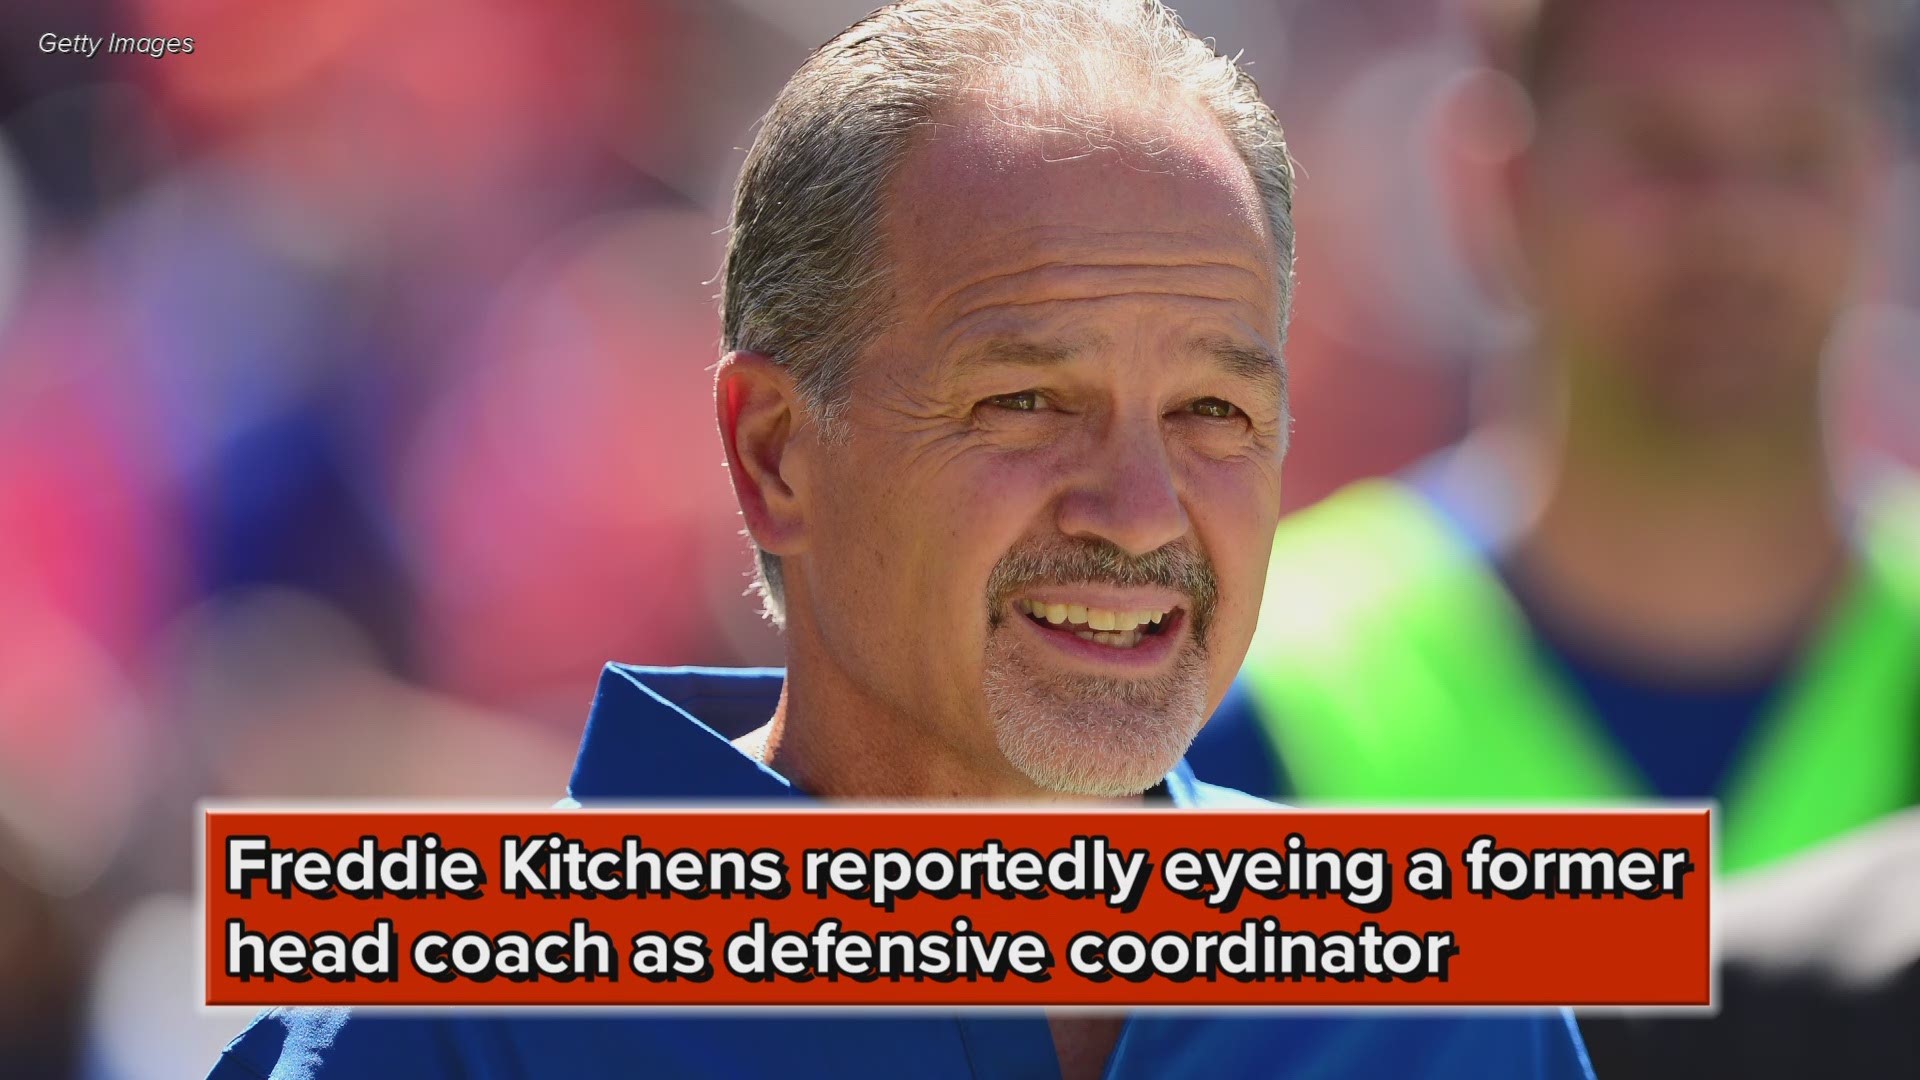 According to Kent Somers of The Arizona Republic, the Cleveland Browns could hire former Indianapolis Colts head coach Chuck Pagano as their new defensive coordinator.